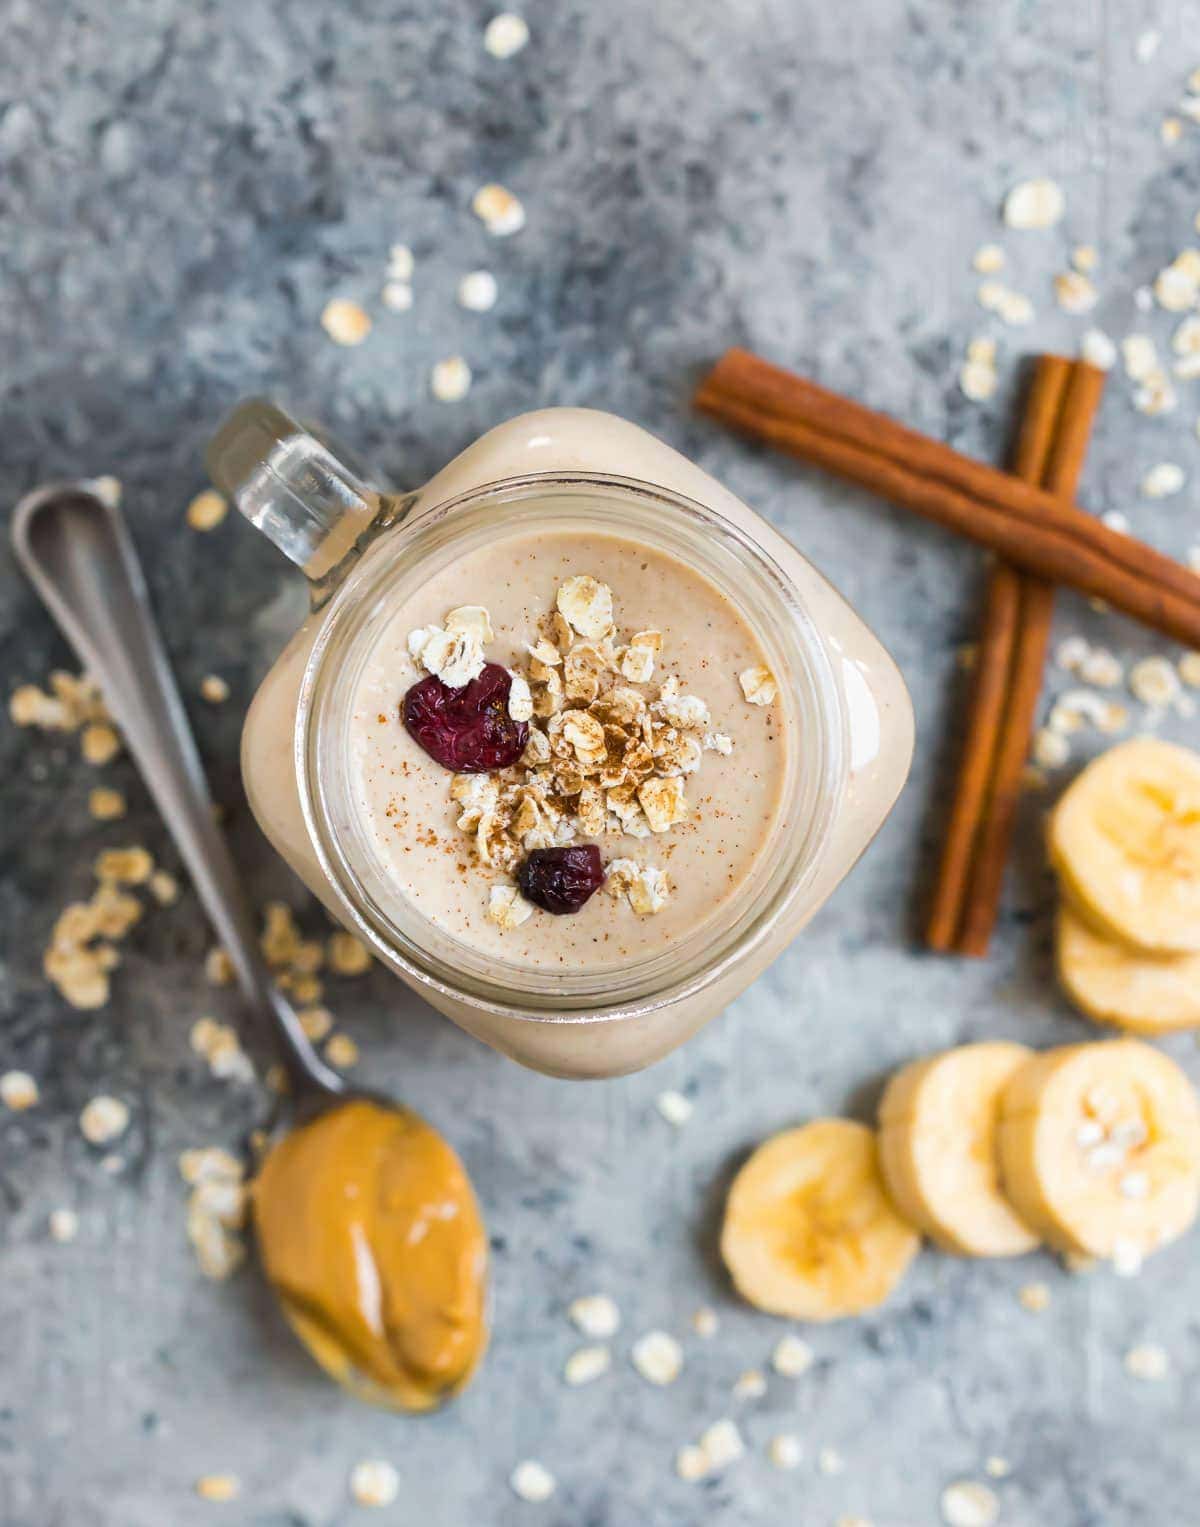 Oatmeal Smoothie from wellplated.com on foodiecrush.com